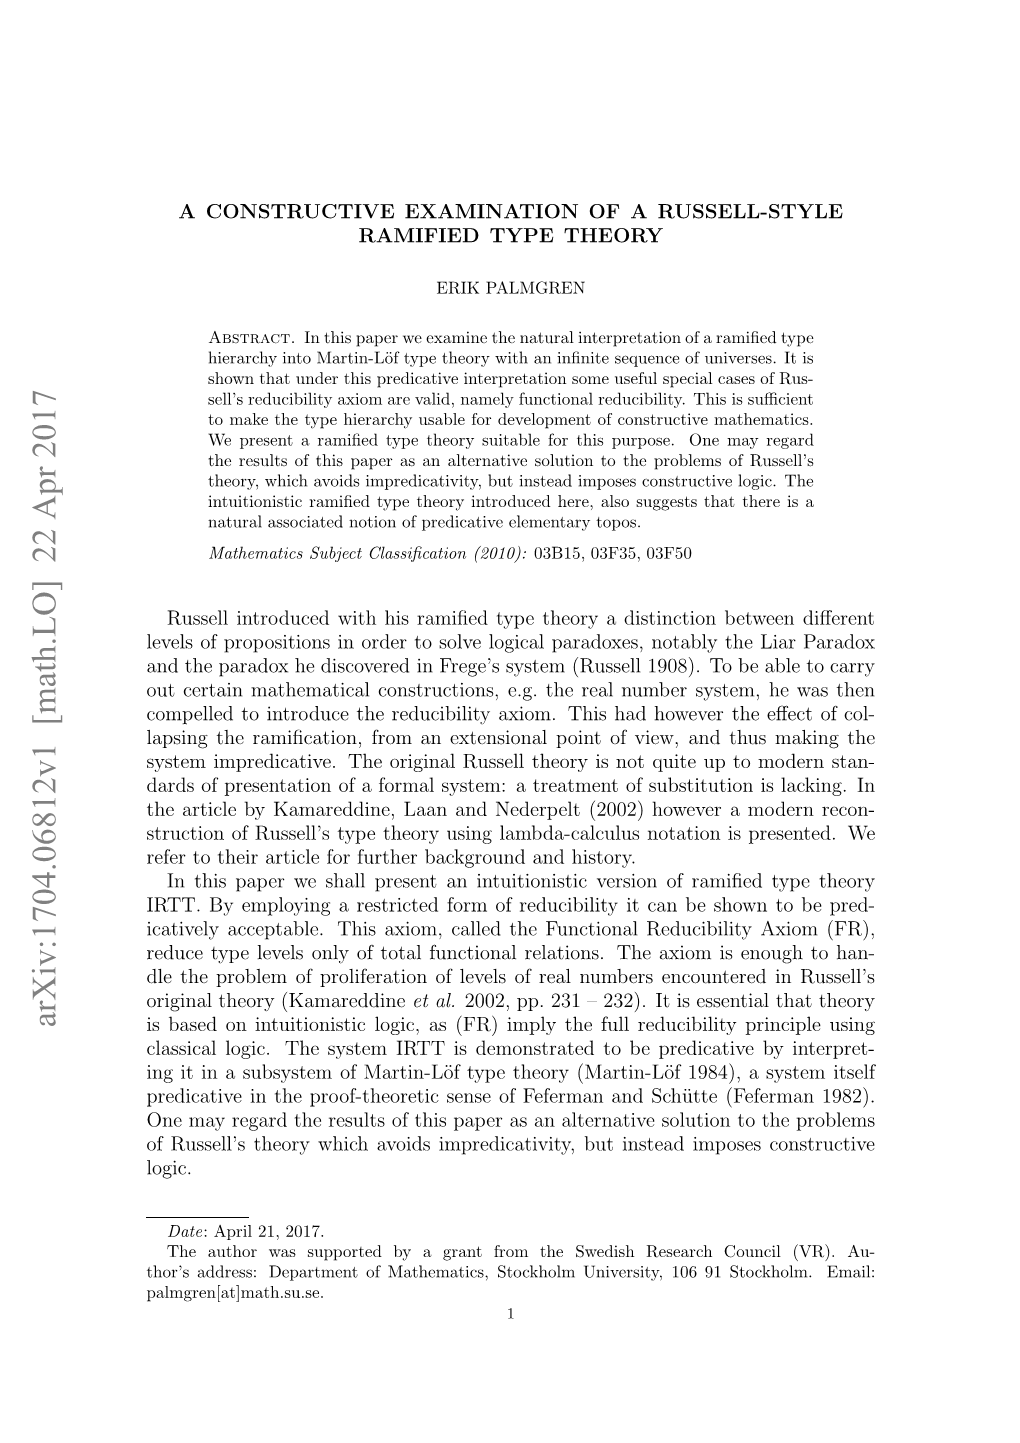 A Constructive Examination of a Russell-Style Ramified Type Theory 3